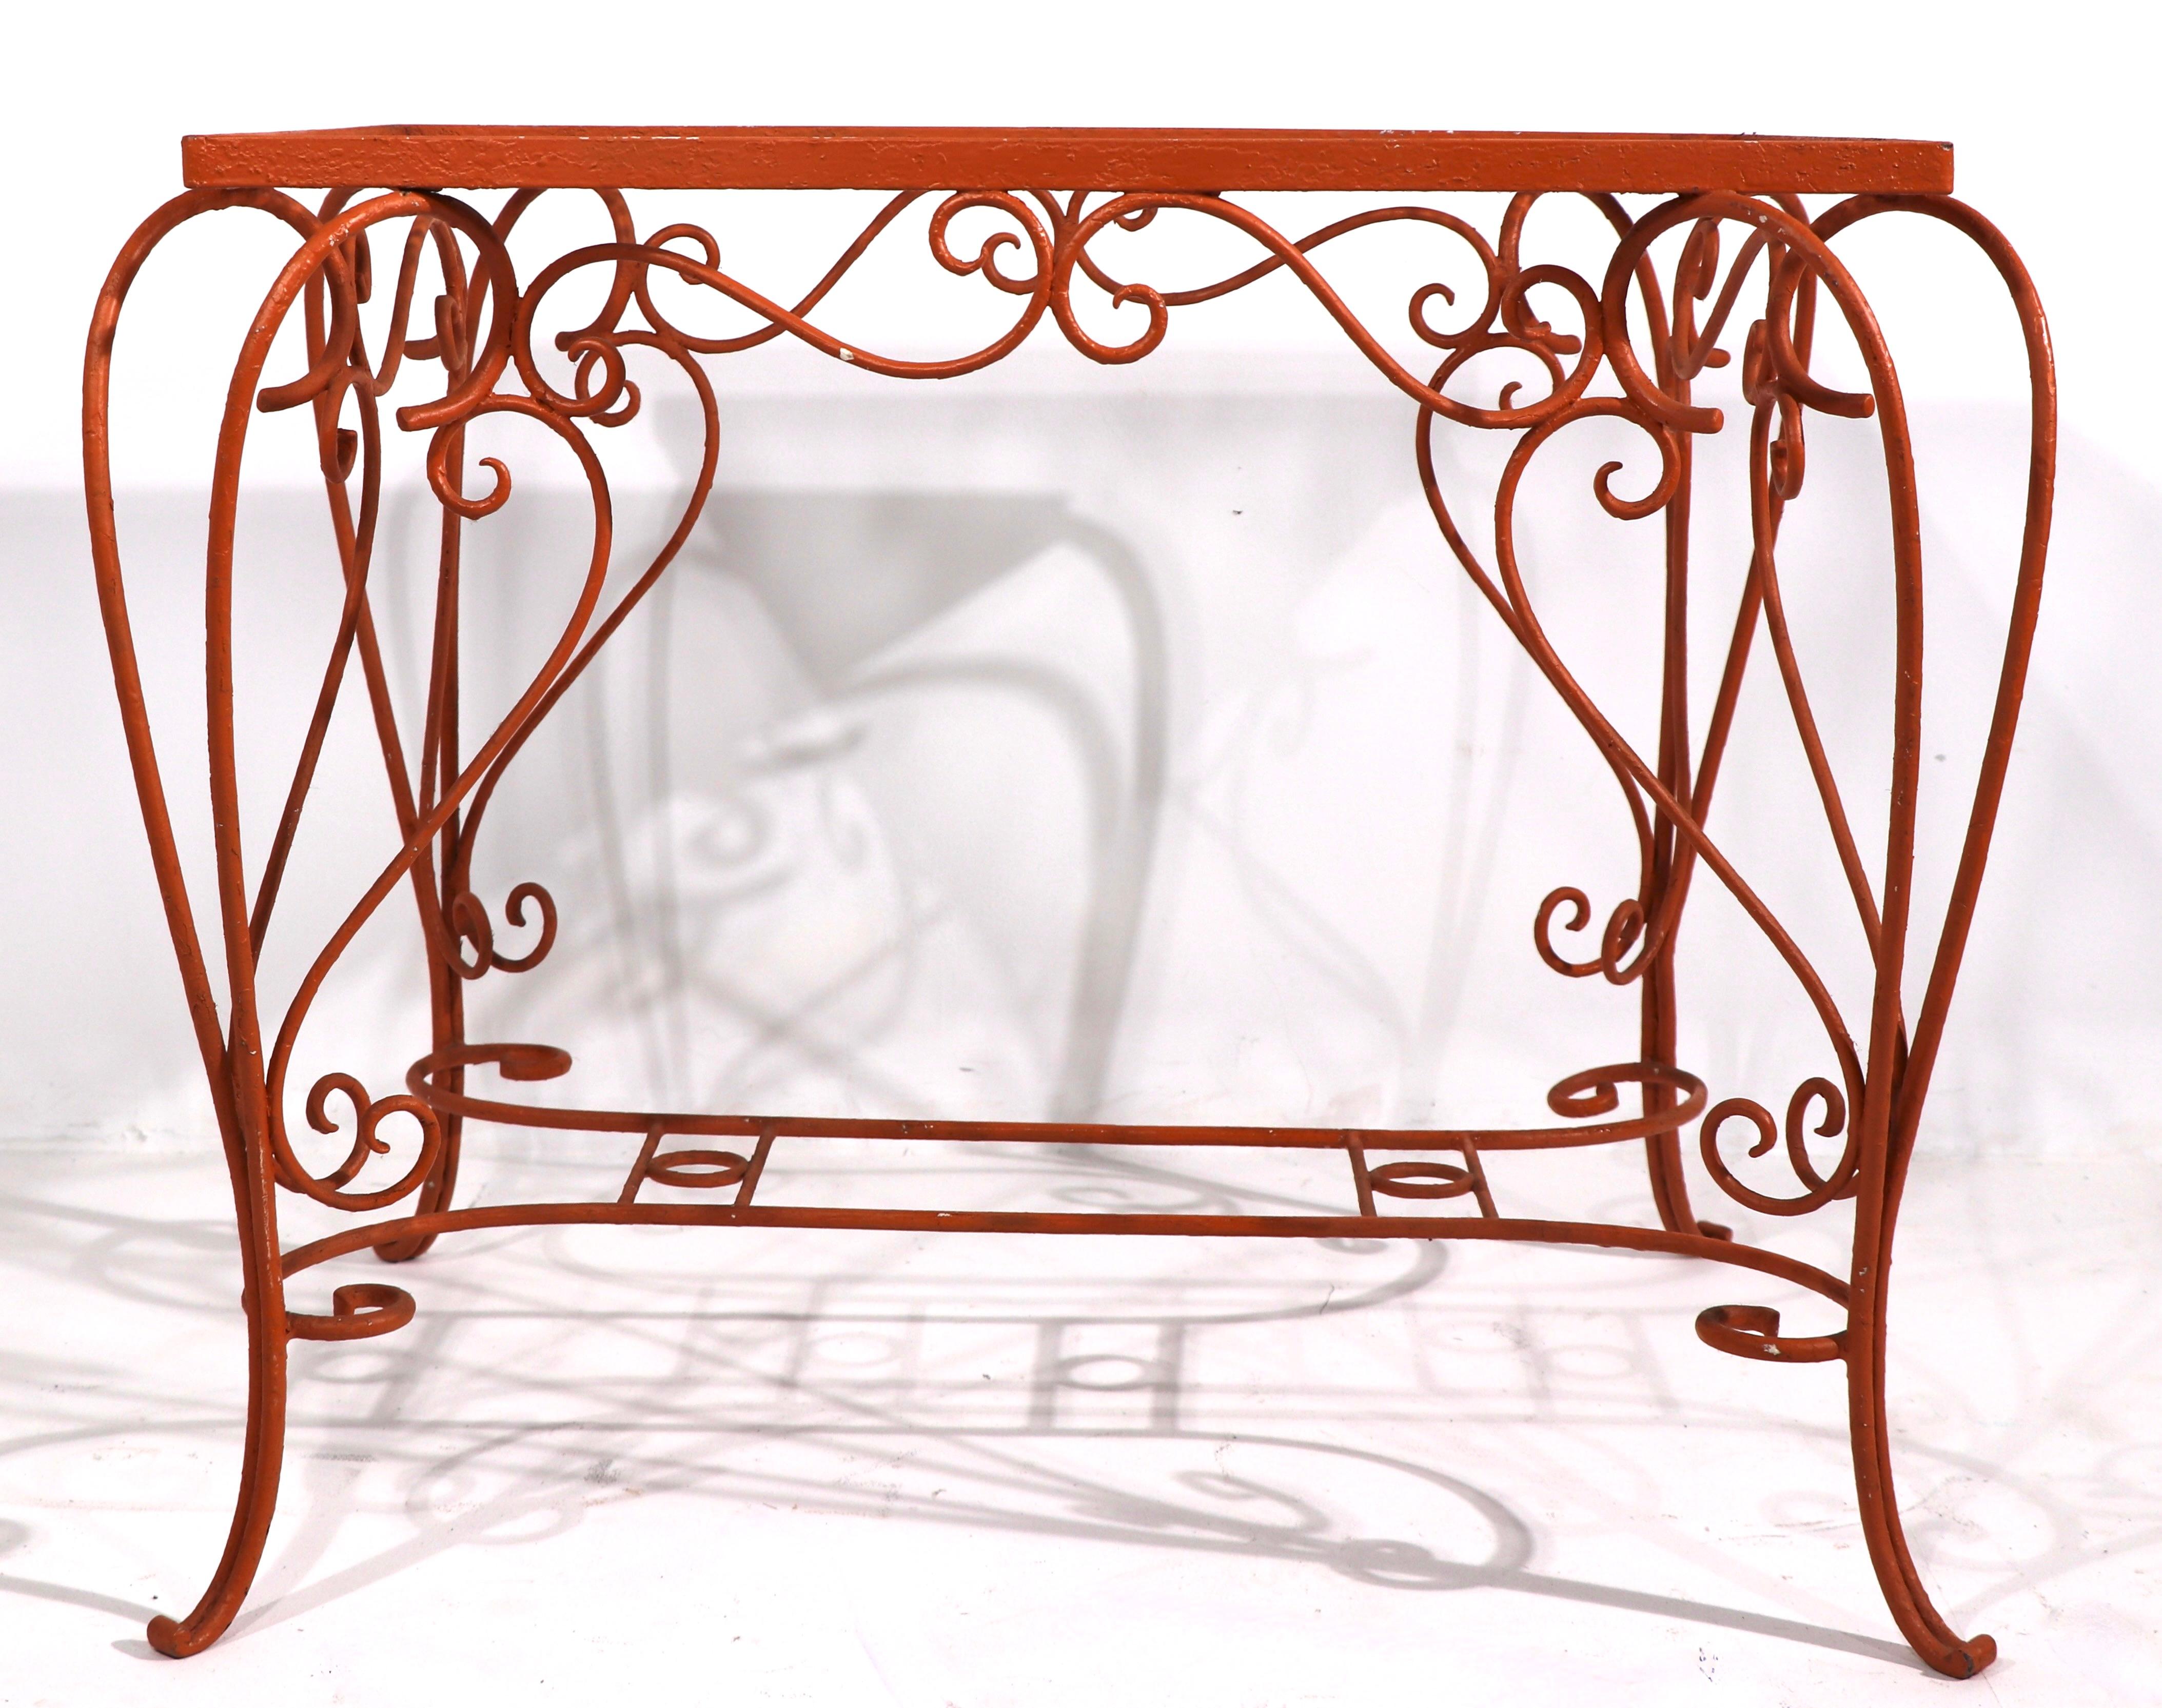 Art Nouveau Ornate Wrought Iron Garden Patio Poolside Table with Textured Glass top